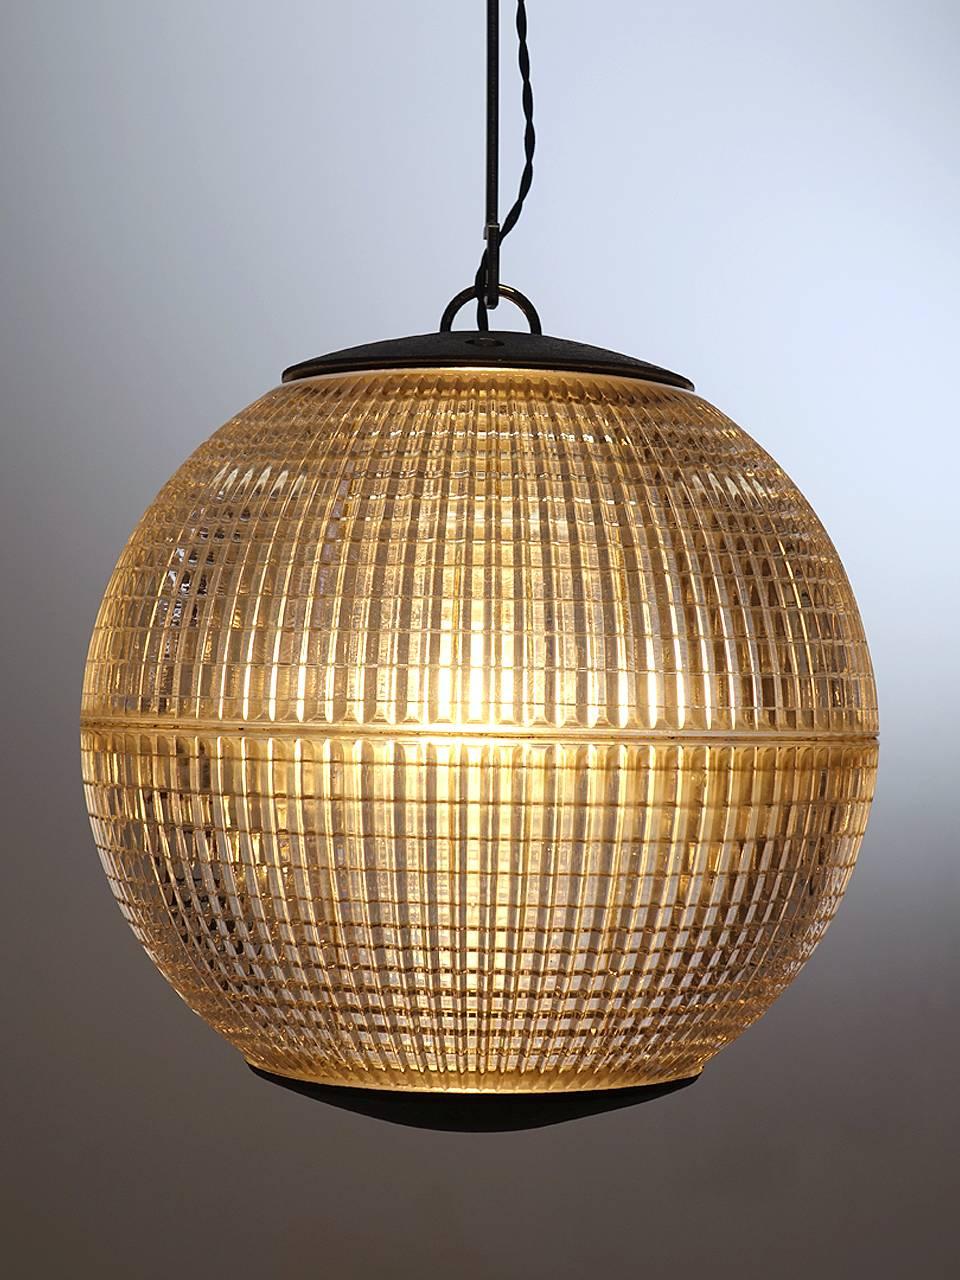 This iconic midcentury prismatic sphere once lighted the thoroughfares of Paris. If you have spent time there you know these lamps well. Since being saved from it's lamp post, this Industrial globe has been rewired for modern, indoor use and the end